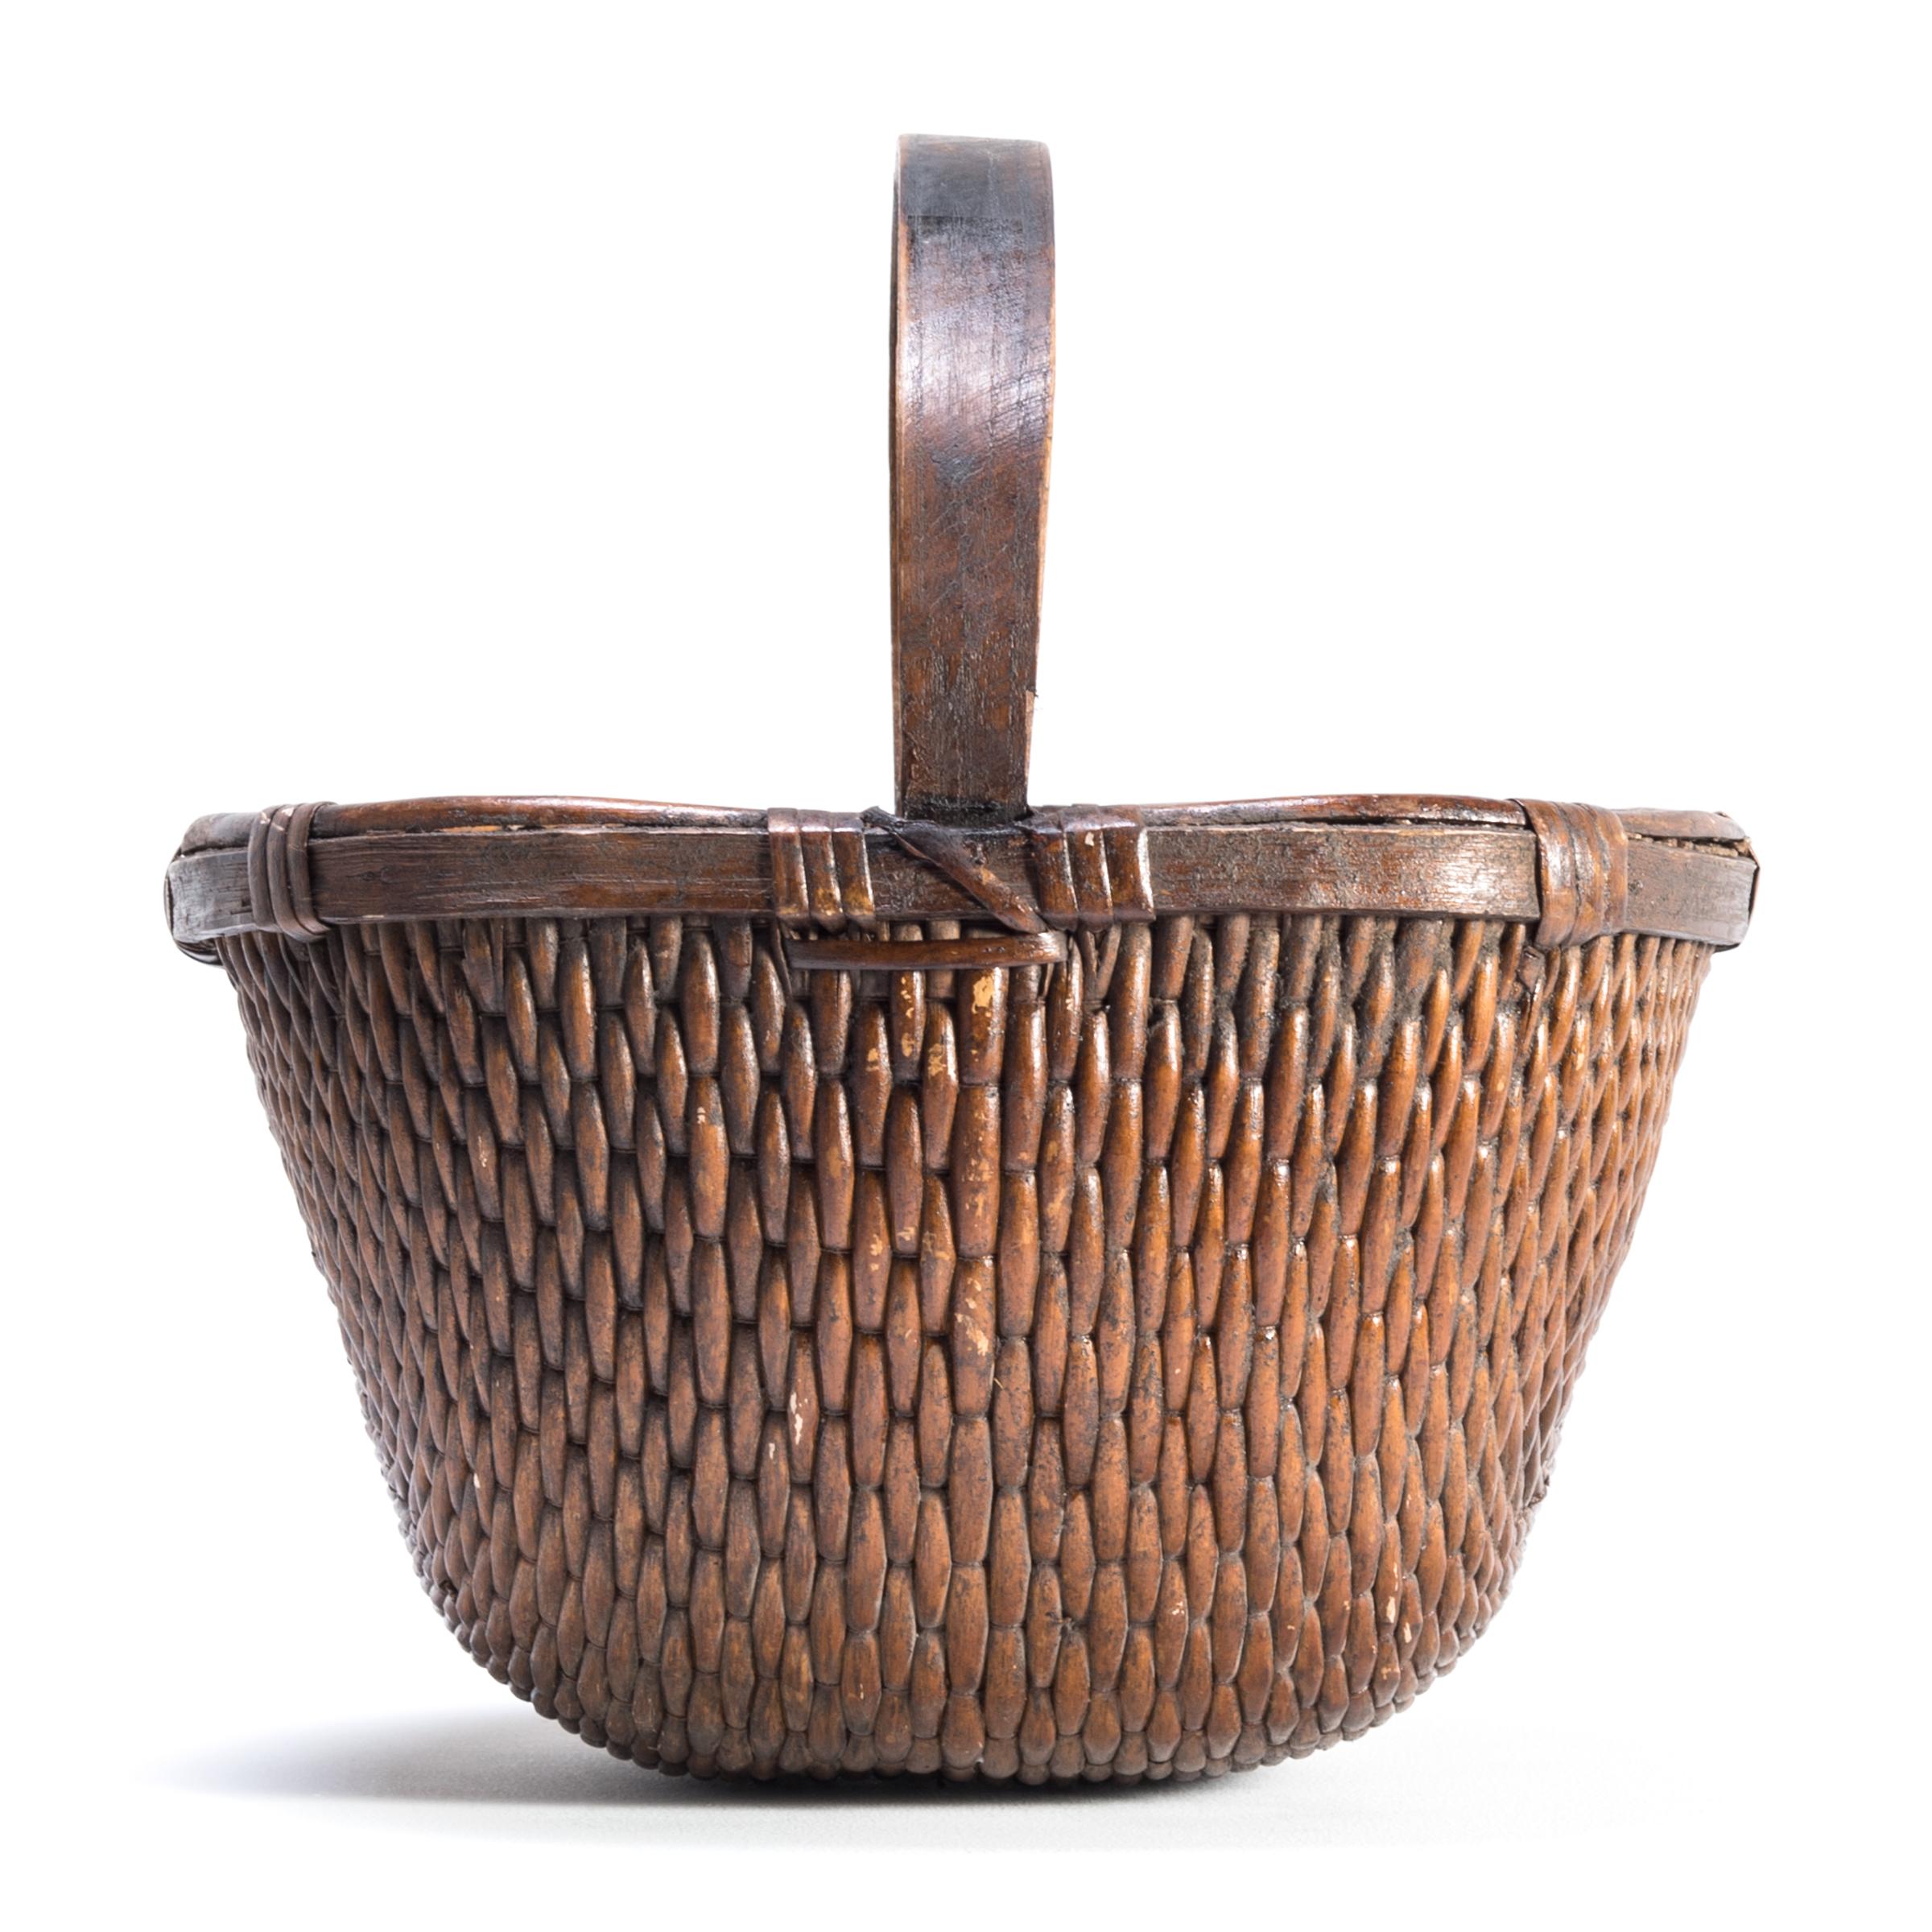 It is easy to imagine someone, long ago, walking to market on a beautiful summer day with this beautiful basket slung over their arm. Basket making is an ancient and humble craft, but in the hands of a truly skilled weaver willow branches, like